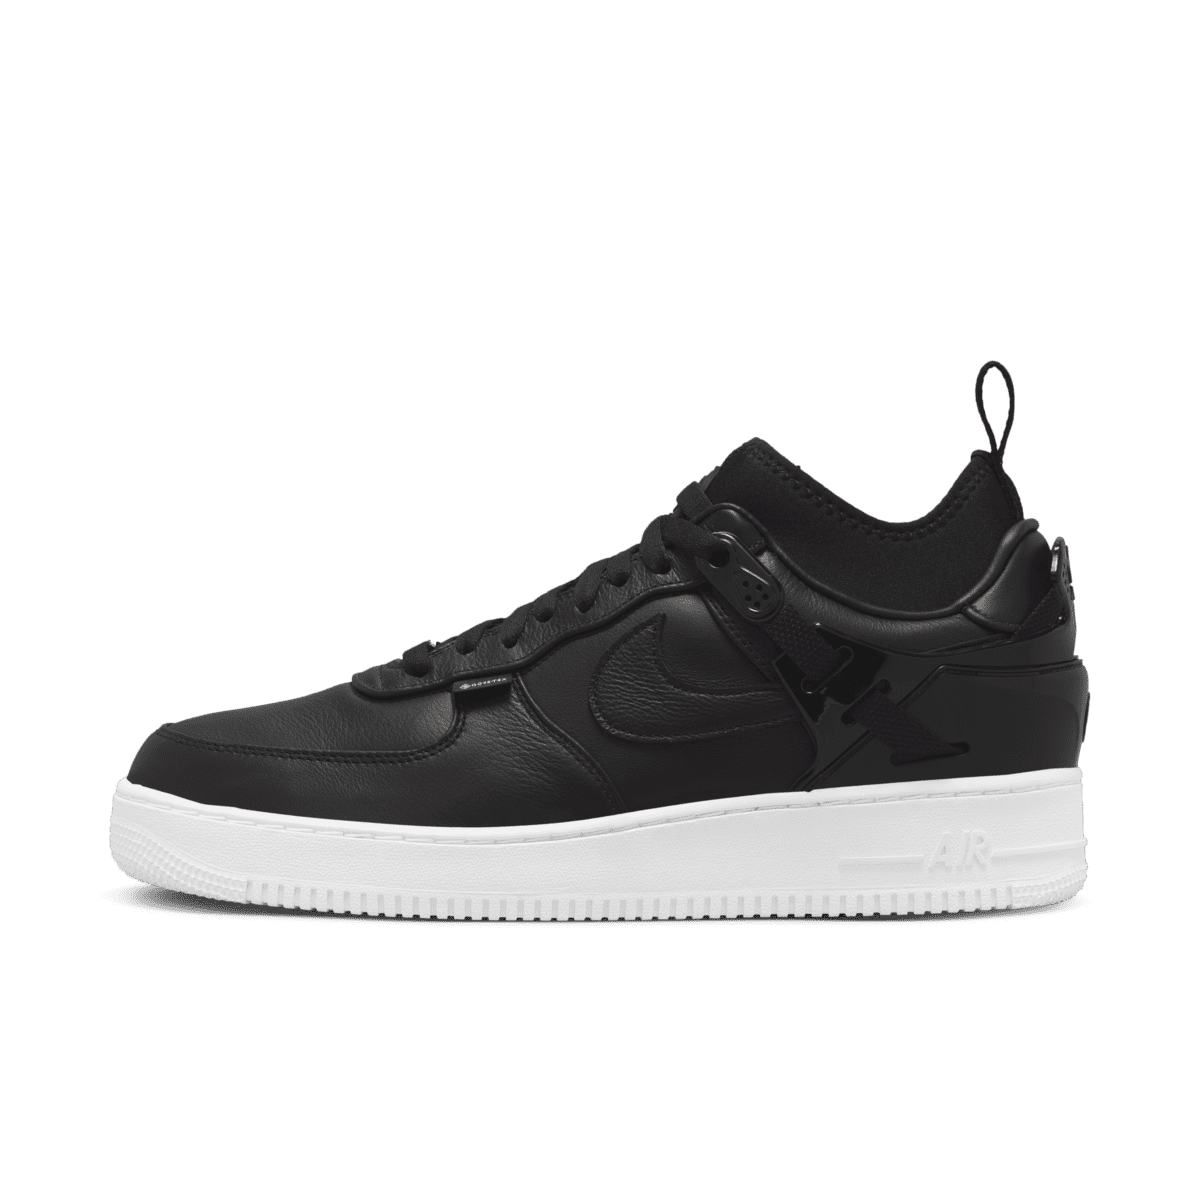 UNDERCOVER x Nike Air Force 1 Low 'Black' DQ7558-002